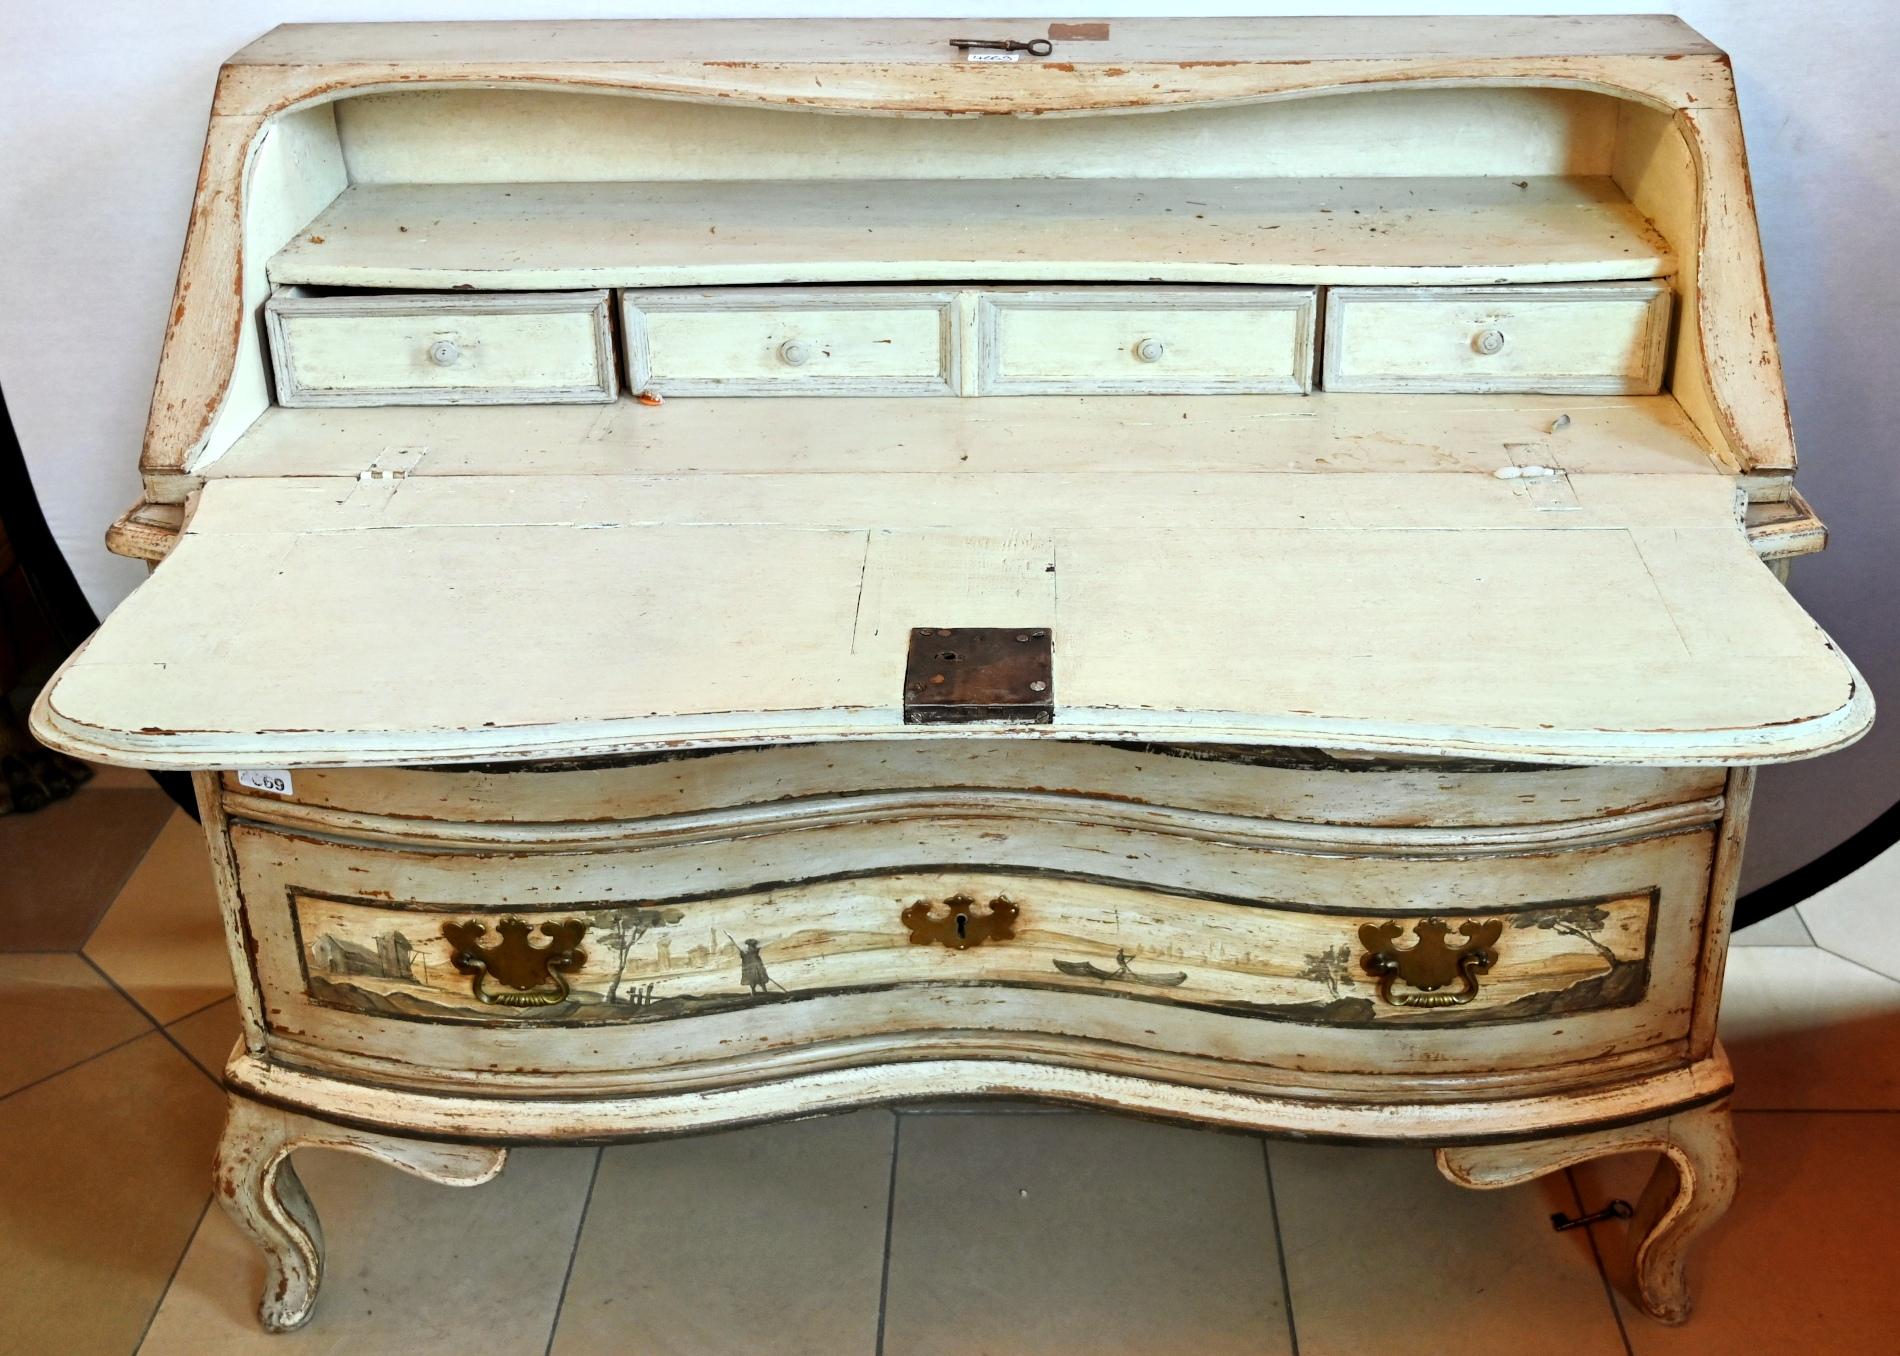  19th century chest of drawers in country style painted in pale grey colors with 2 drawers. Original handles in brass with keys. The painting shows a decorative baroque Dutch landscape. 
Depth when closed 50 cm, 80 cm when open.